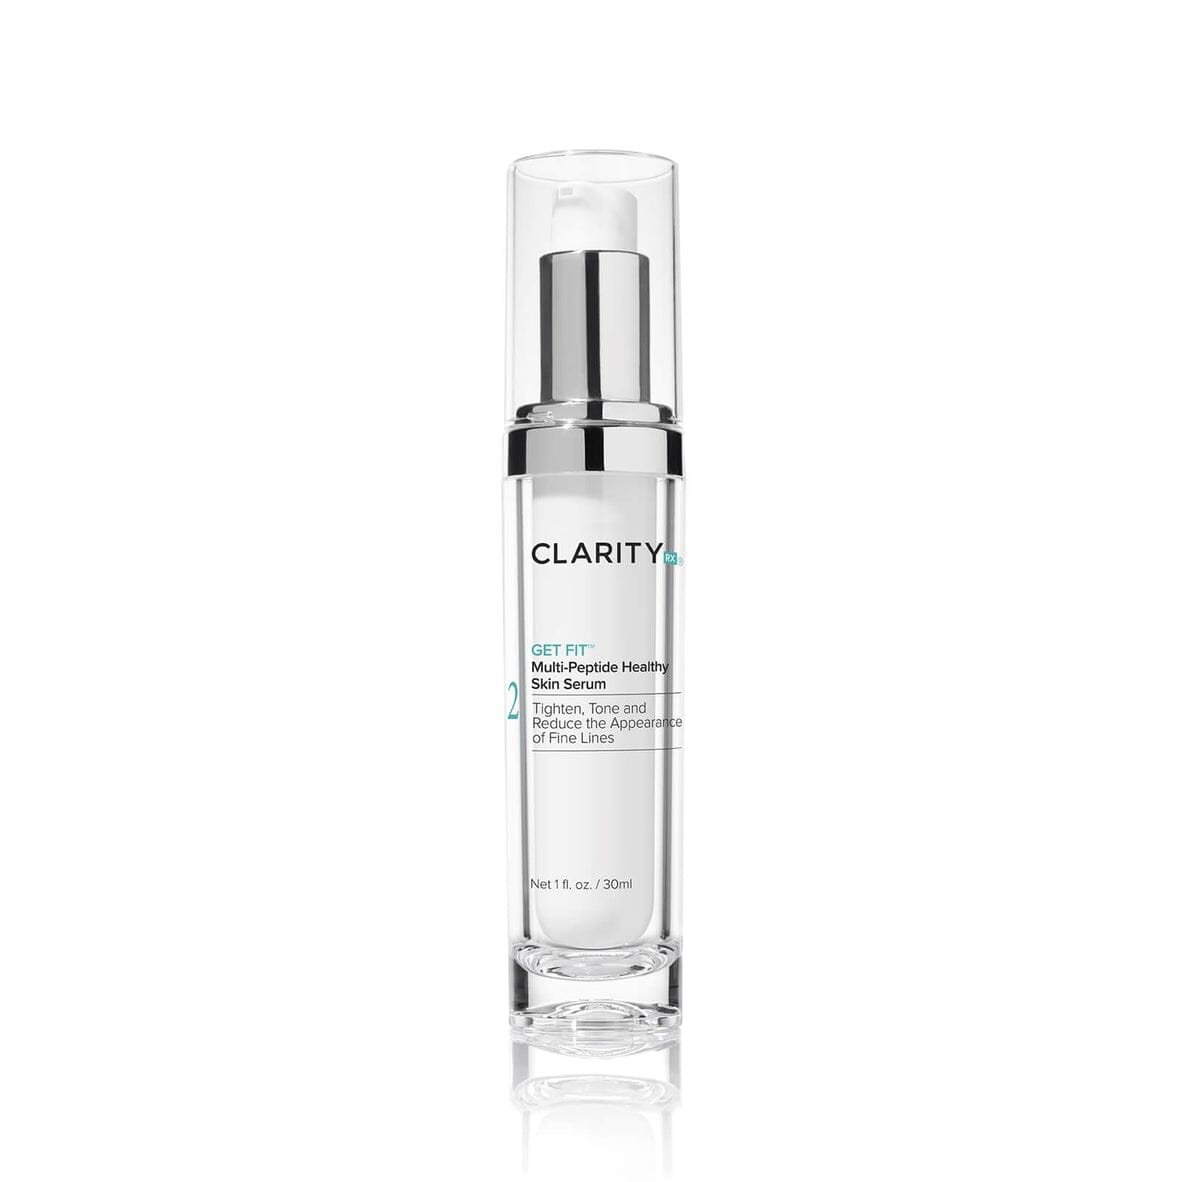 ClarityRx Get Fit Mult-Peptide Healthy Skin Serum ClarityRx 1.0 fl. oz. Shop at Exclusive Beauty Club